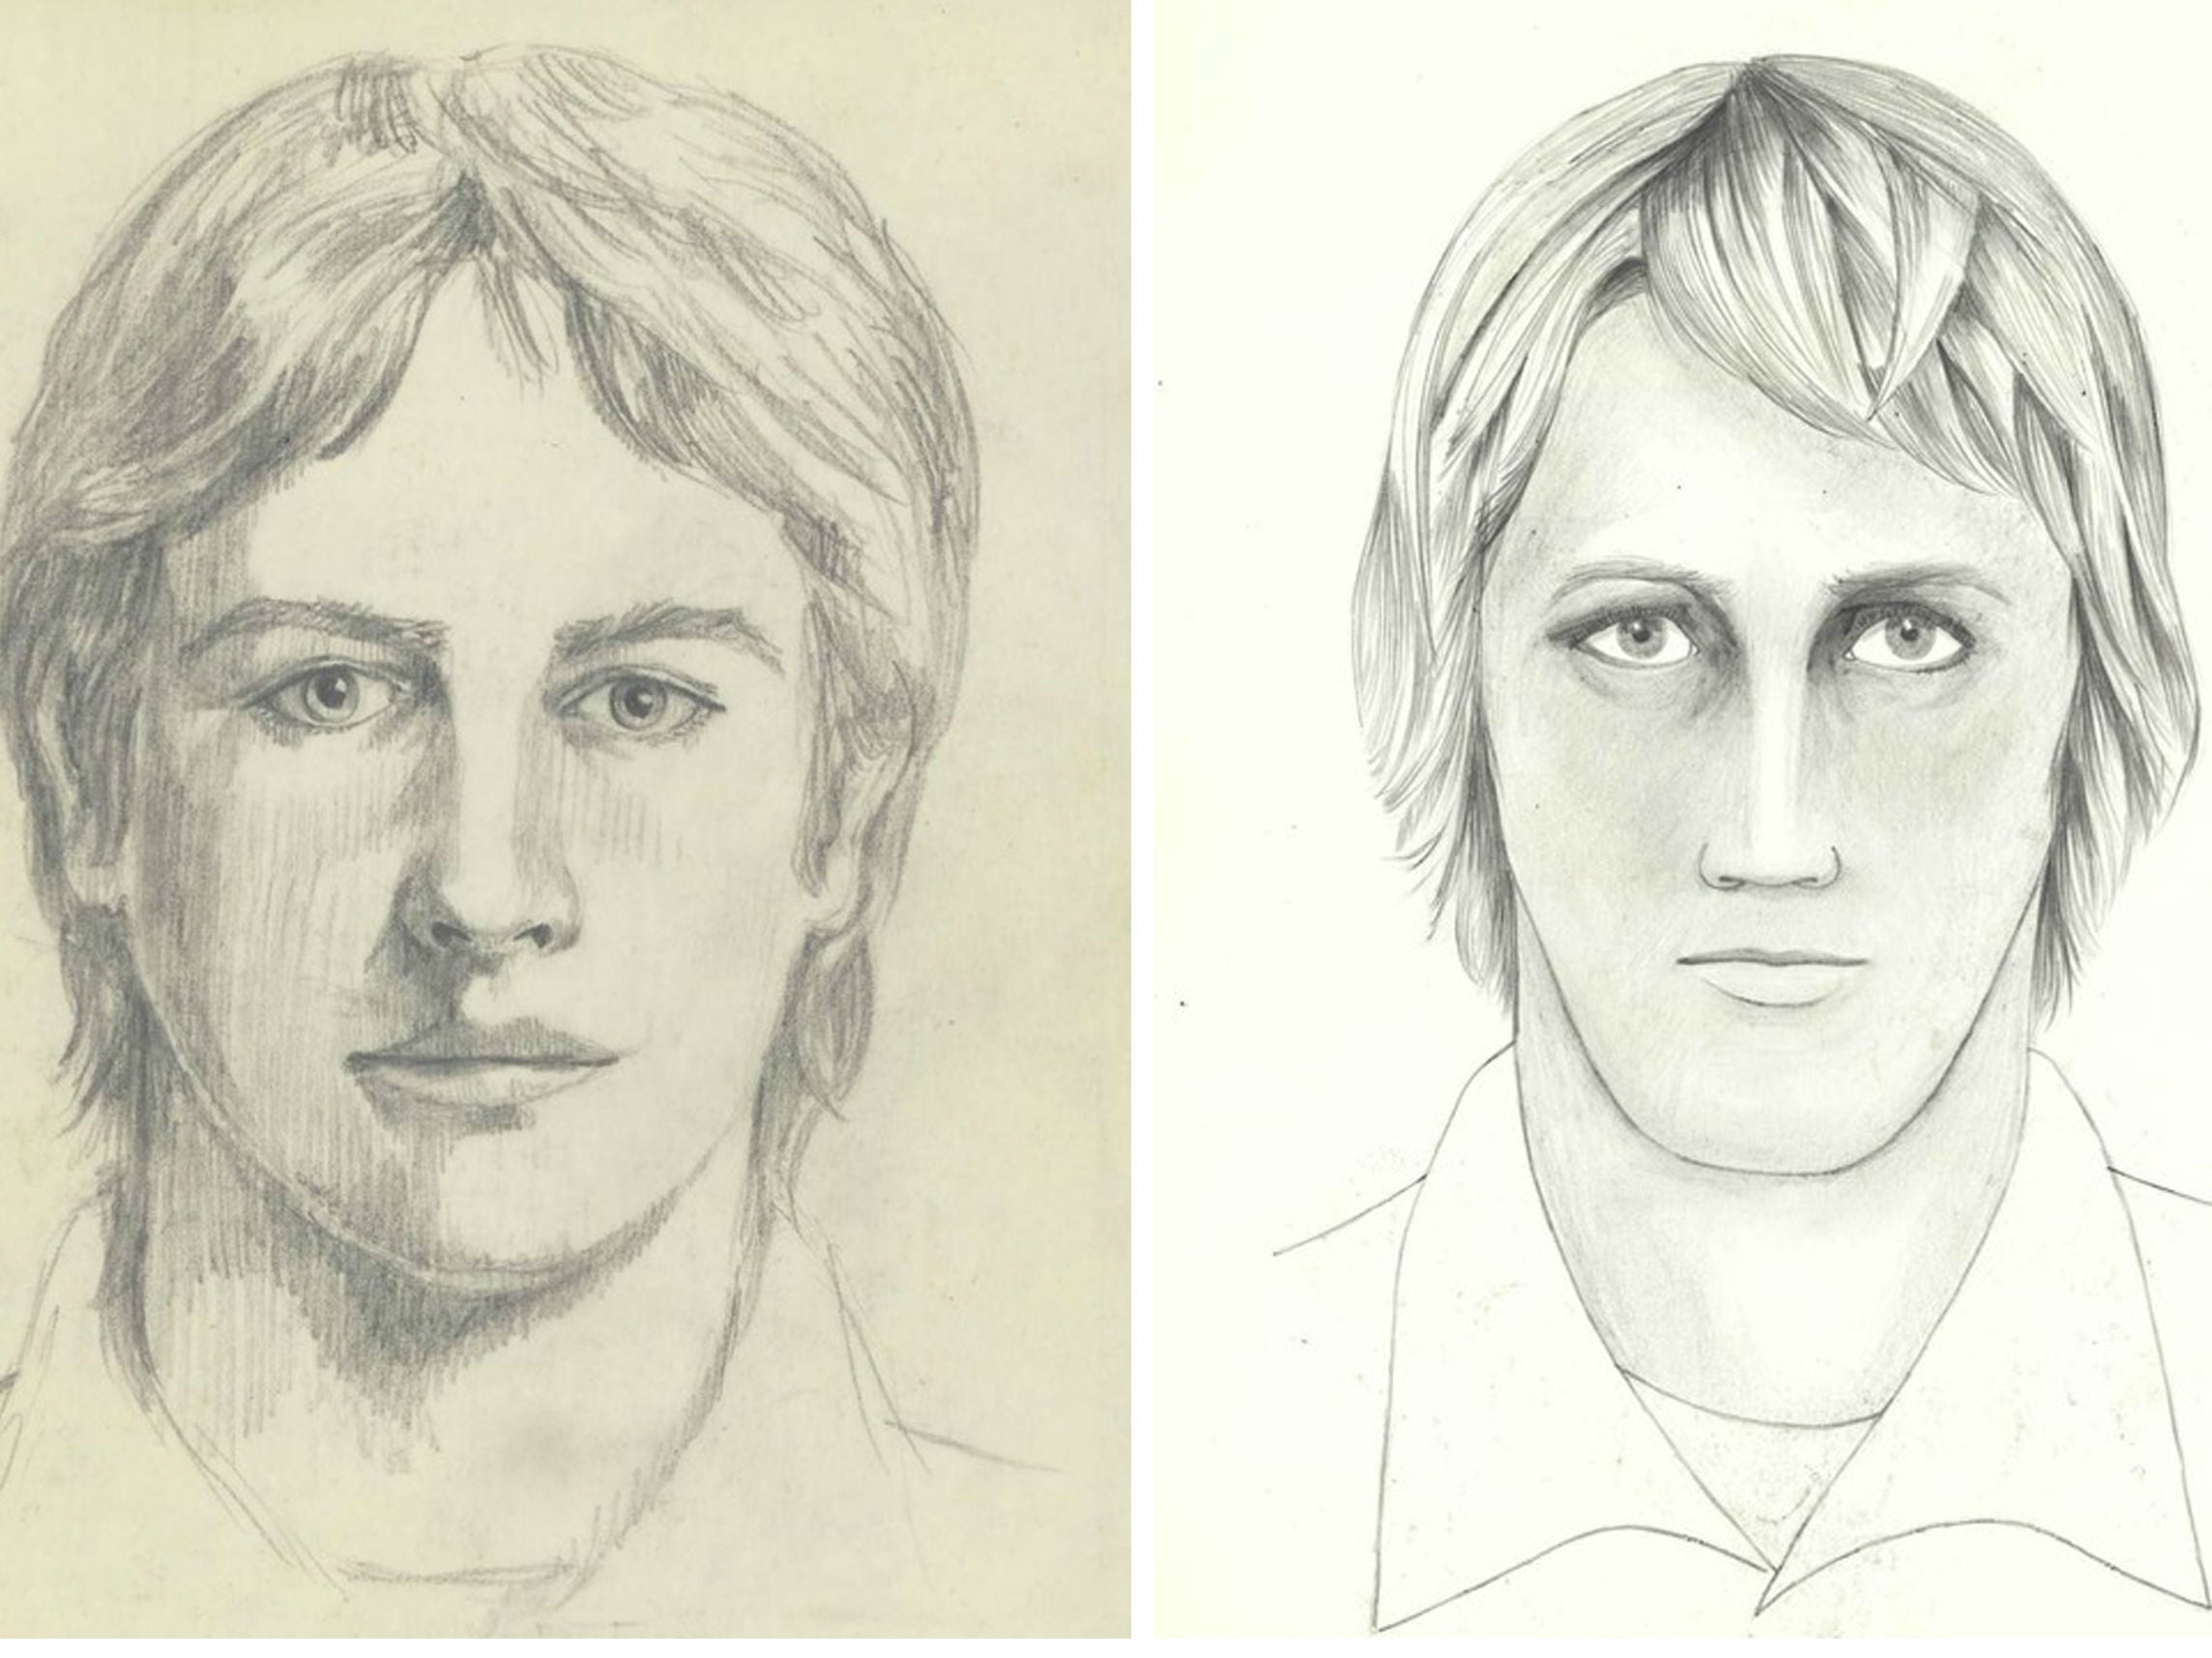 A combination image shows FBI sketches of the East Area Rapist